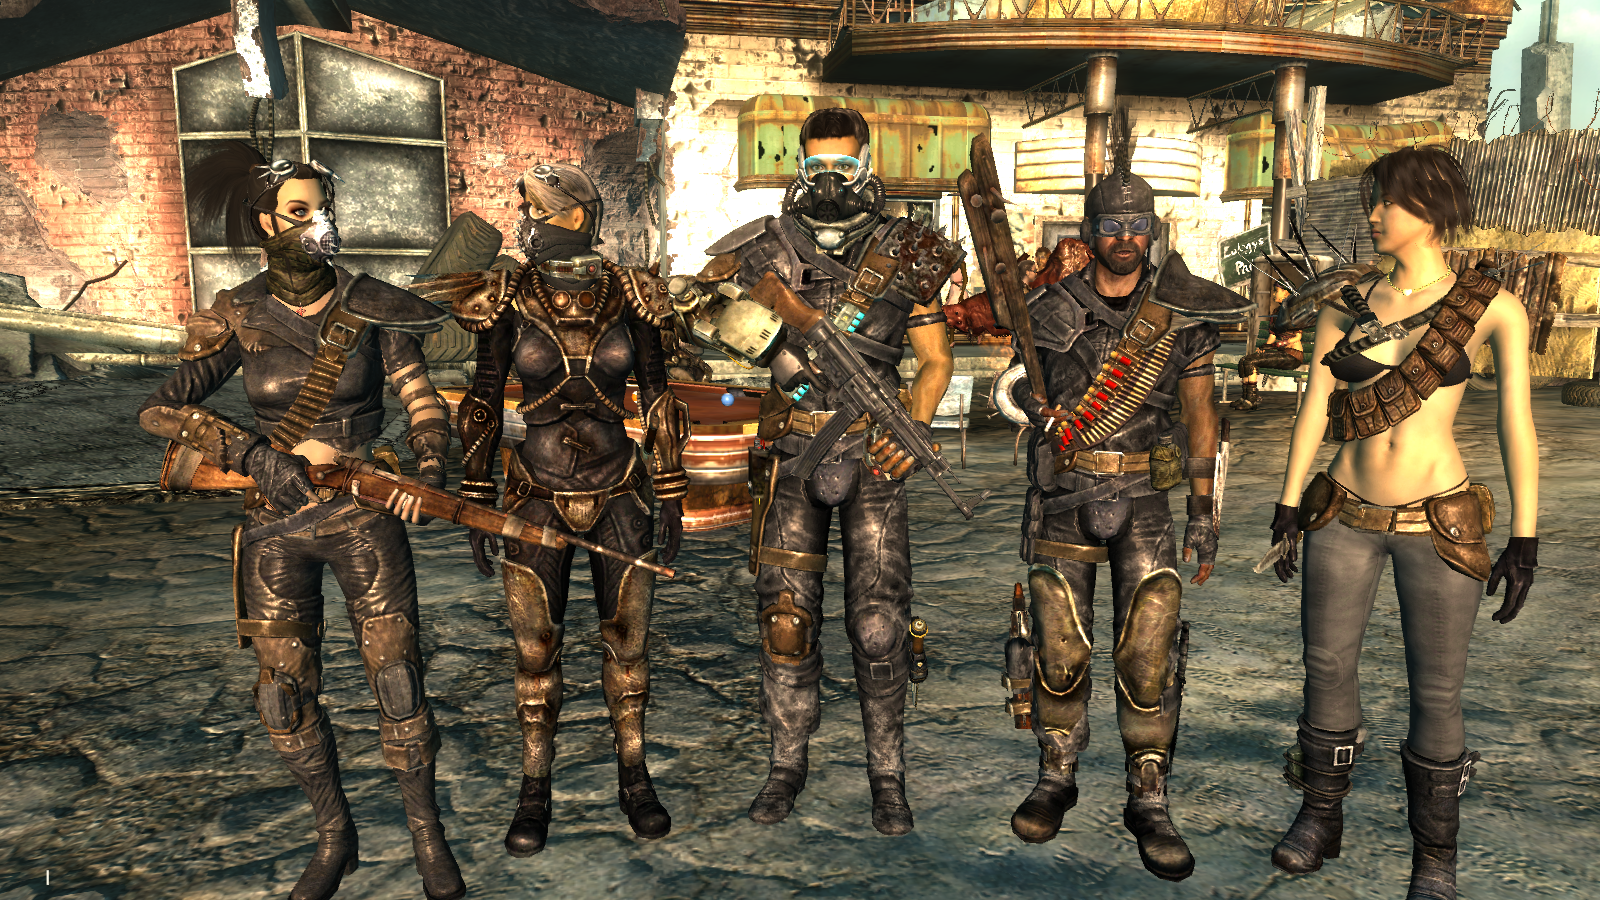 Fallout 3 Companions Vol. 1 by SPARTAN22294 on DeviantArt